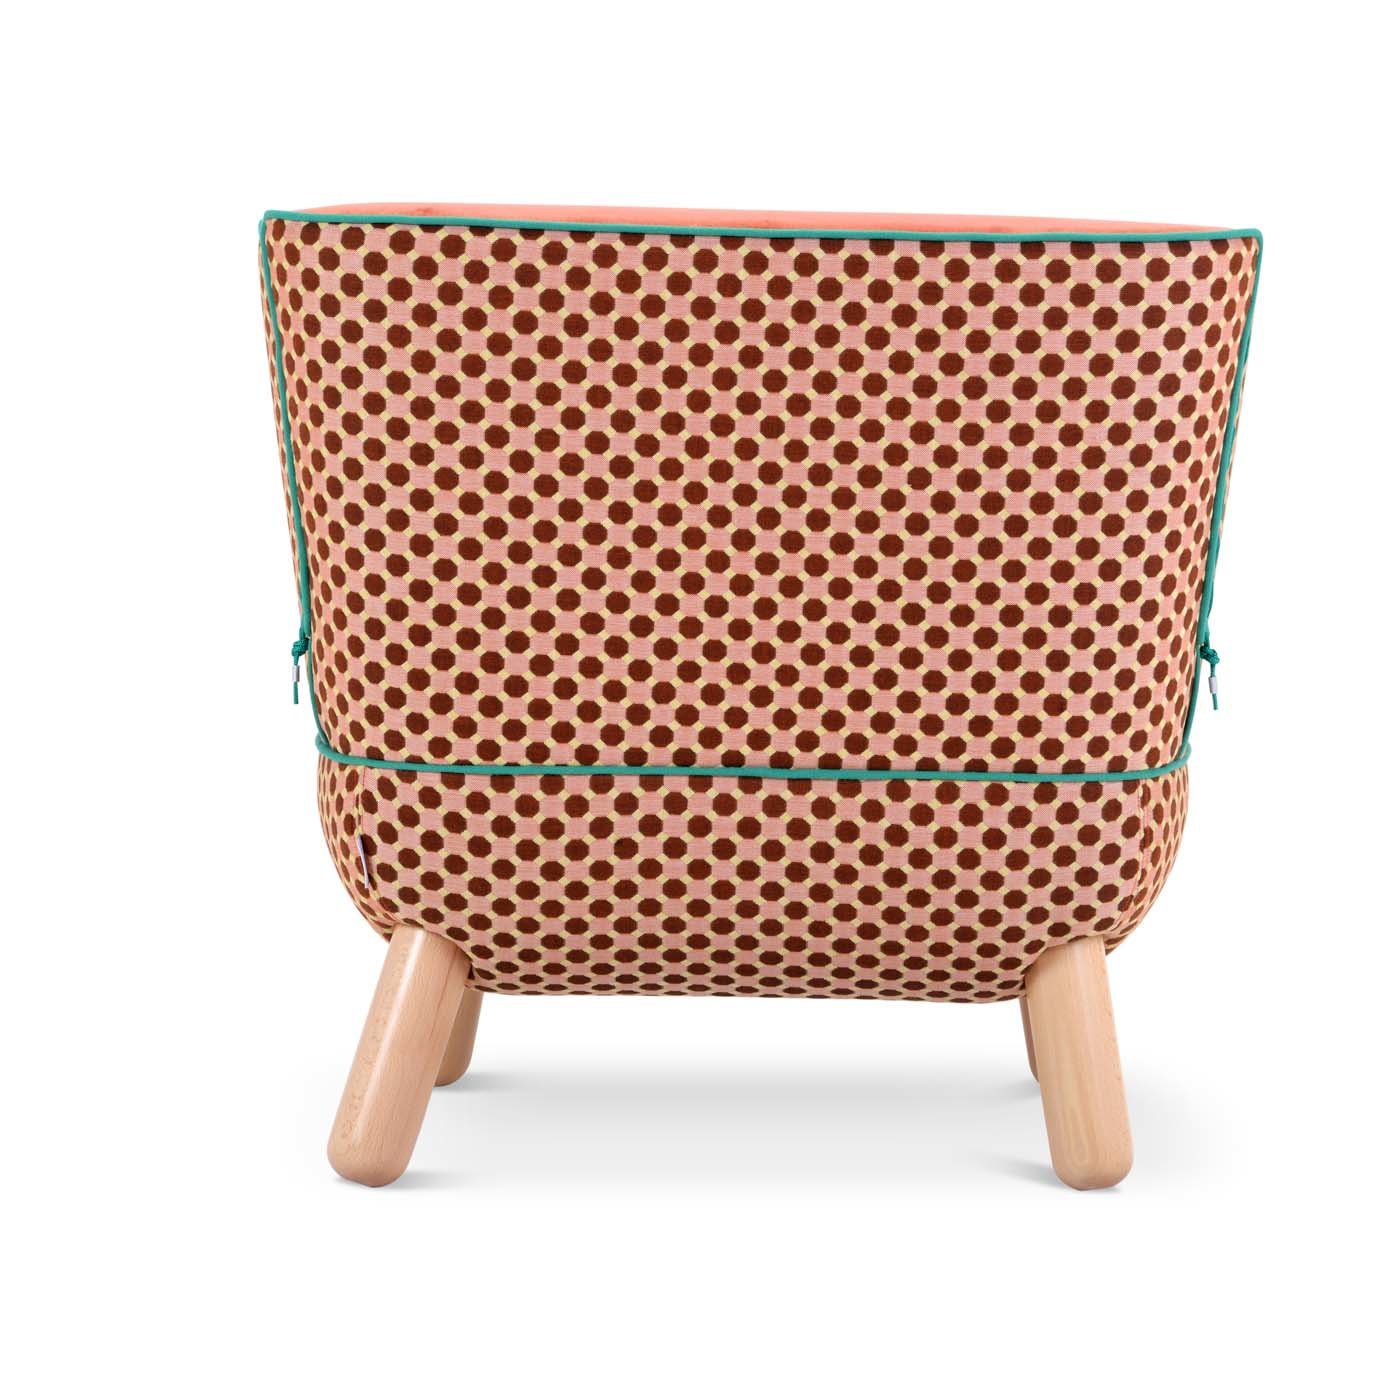 Sly Low Armchair with Ropes By Italo Pertichini rombi - Alternative view 4